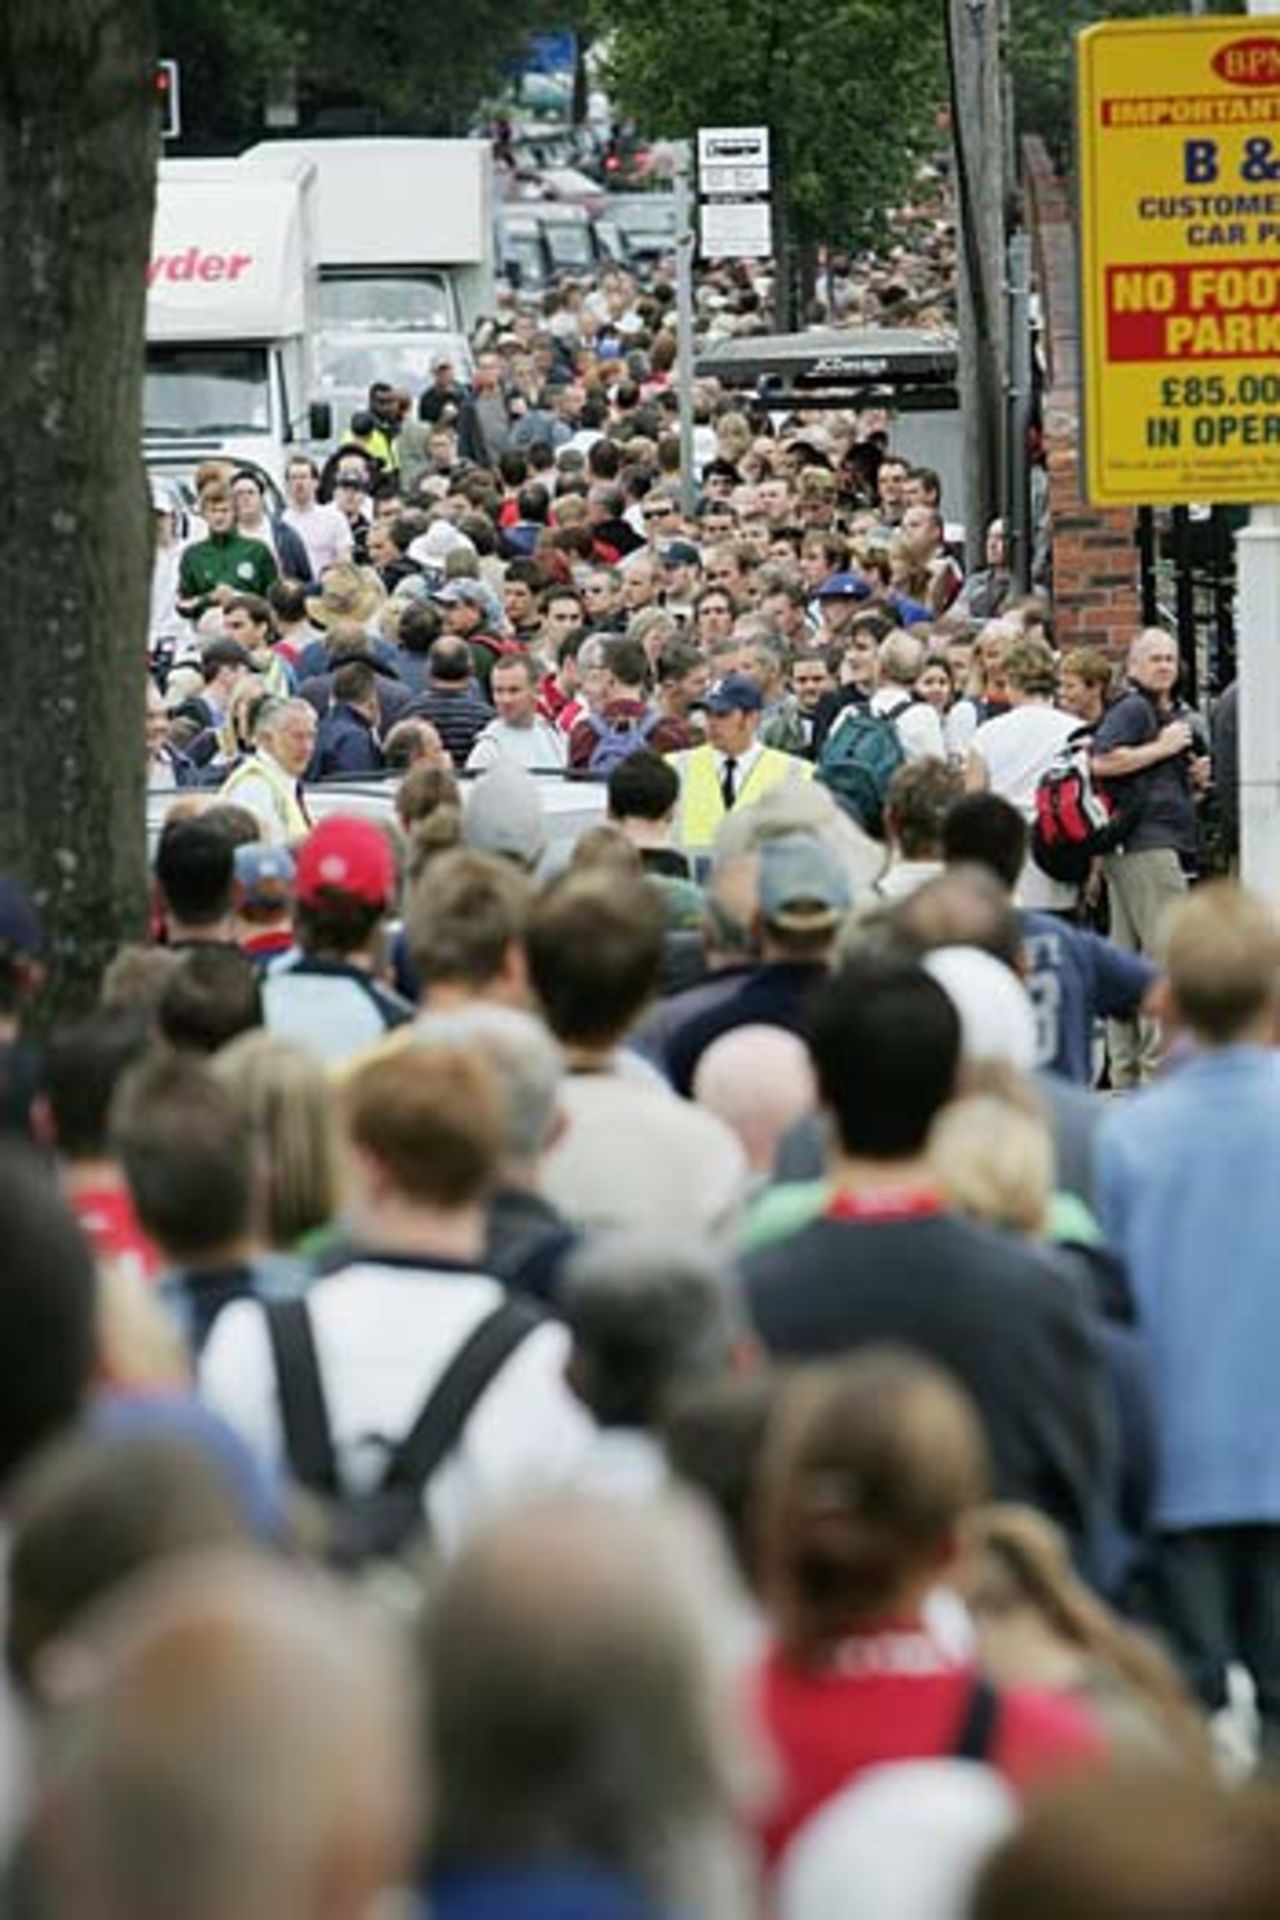 Huge crowds wait to get into Old Trafford - the gates were closed half an hour before the start with 21,000 in the ground, England v Australia, 3rd Test, Old Trafford, August 15, 2005